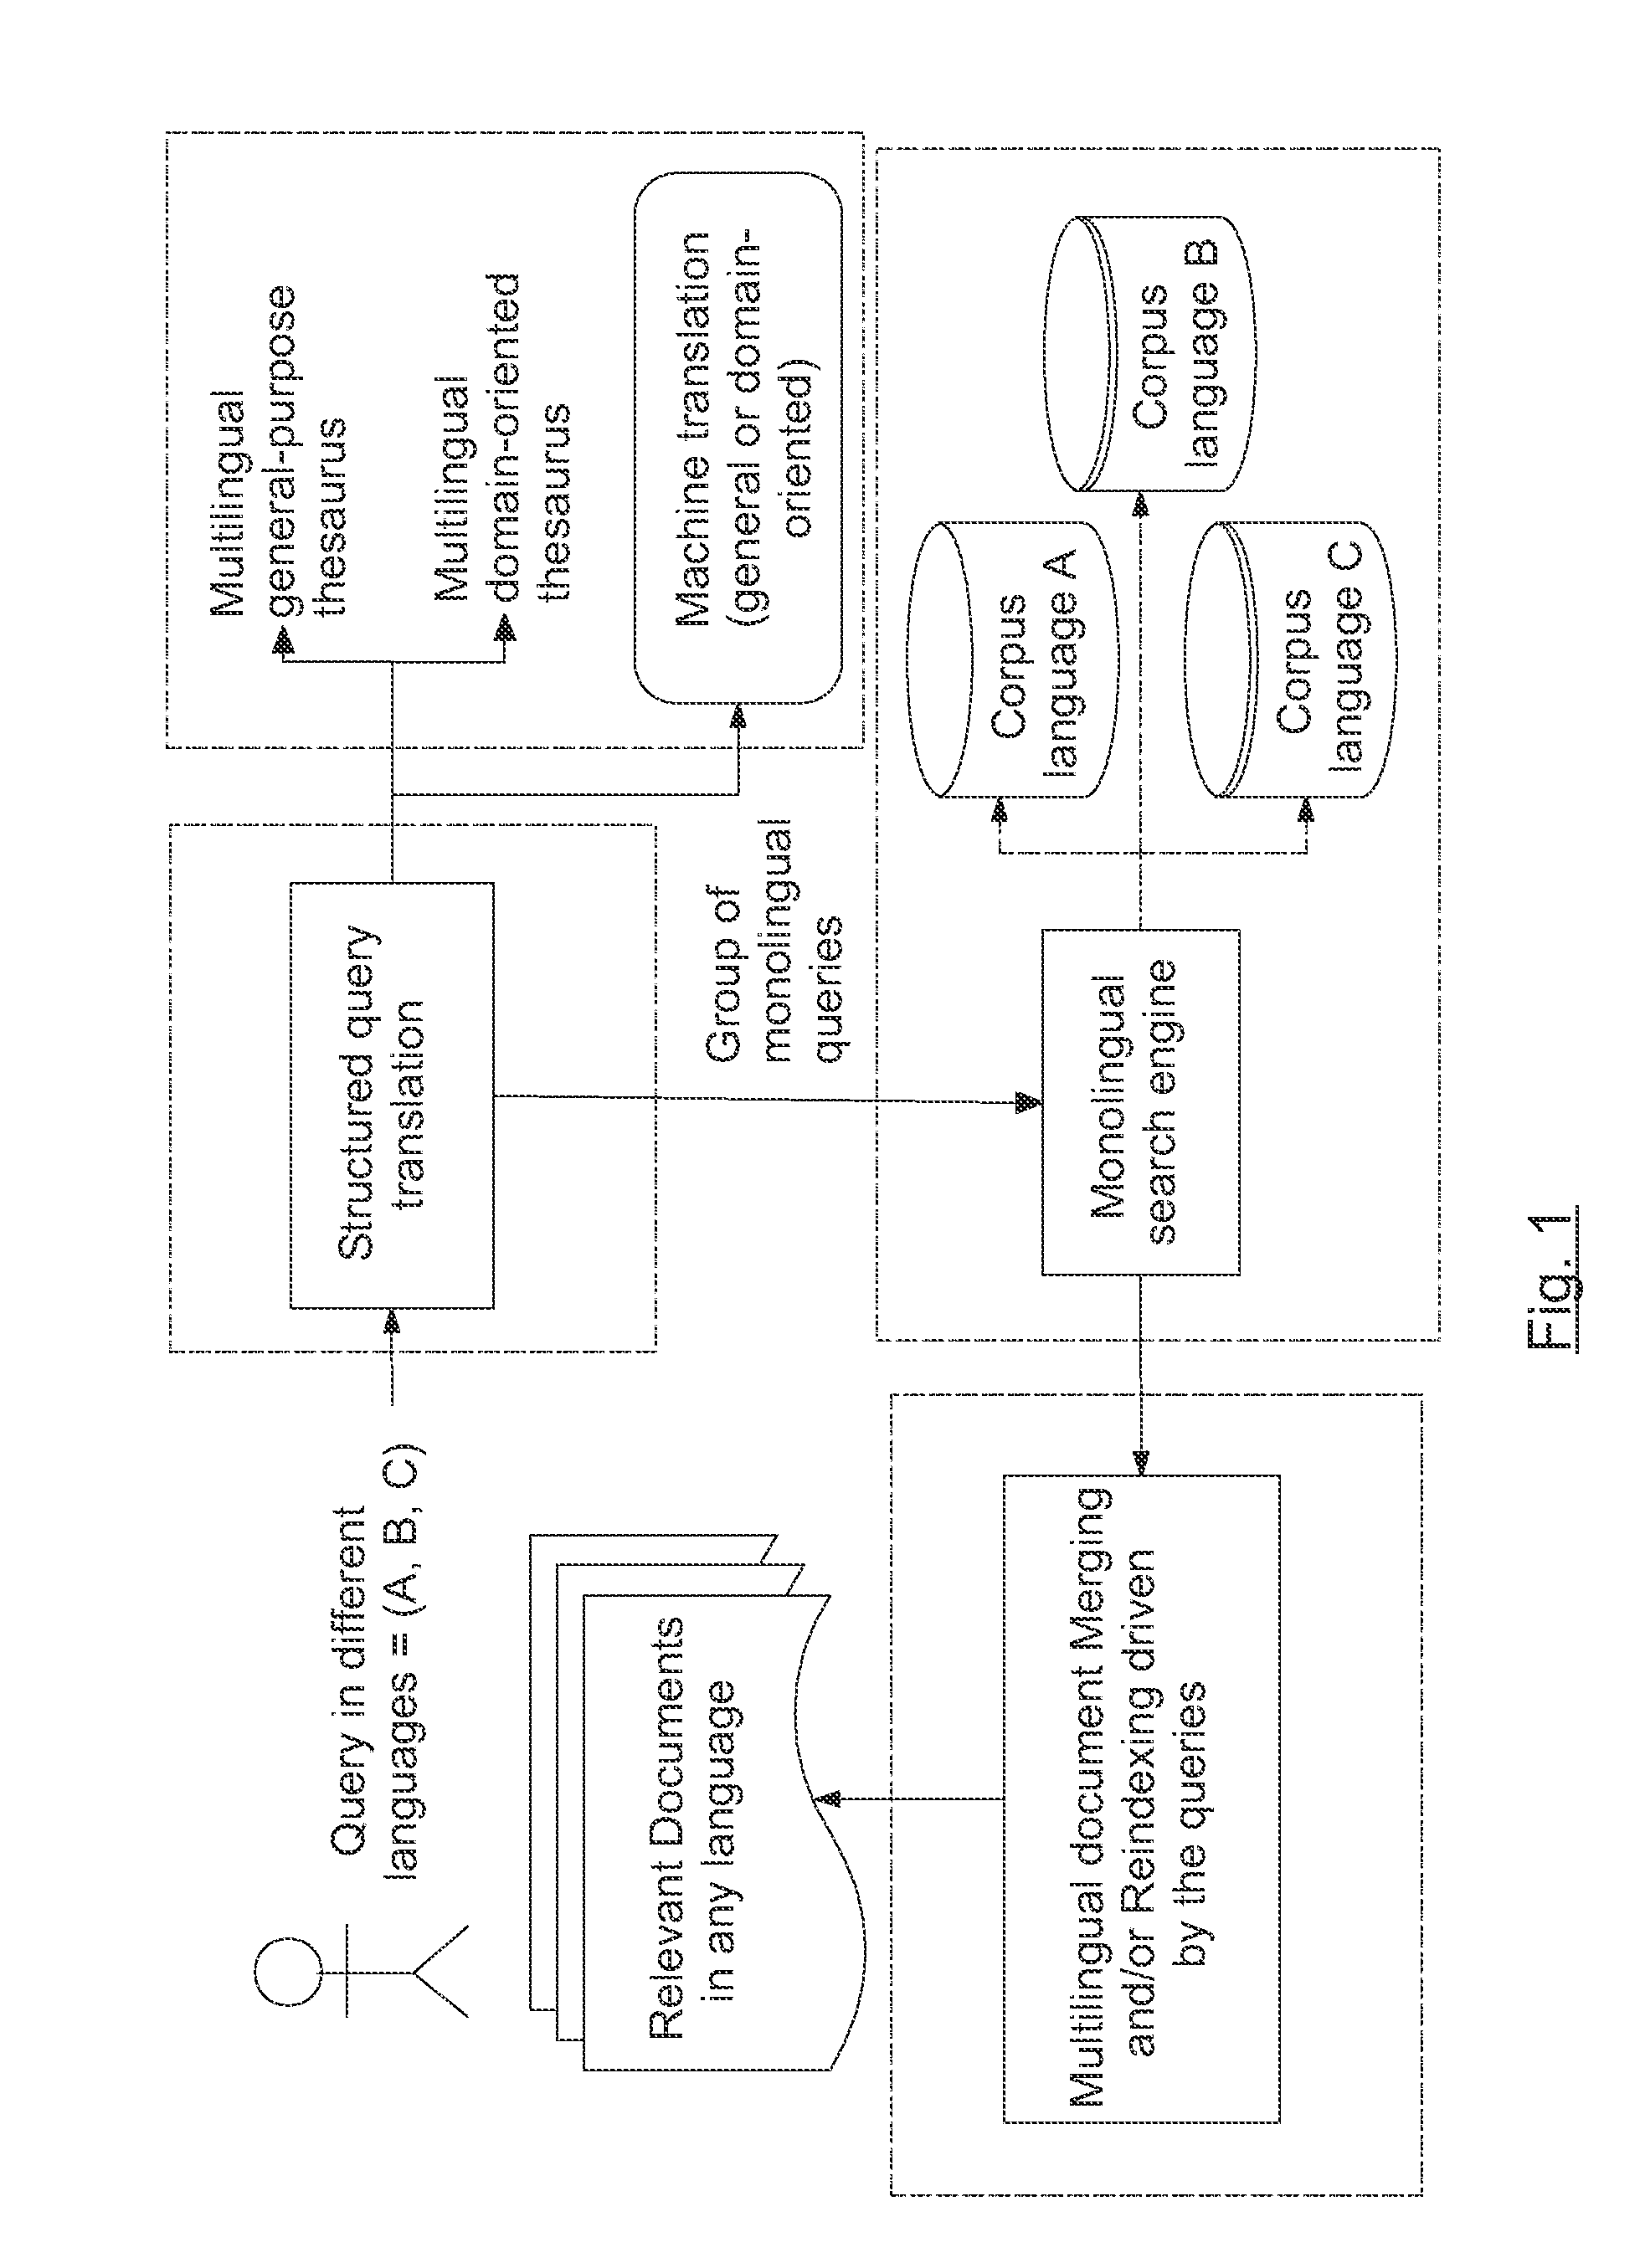 System and method for the indexing and retrieval of semantically annotated data using an ontology-based information retrieval model